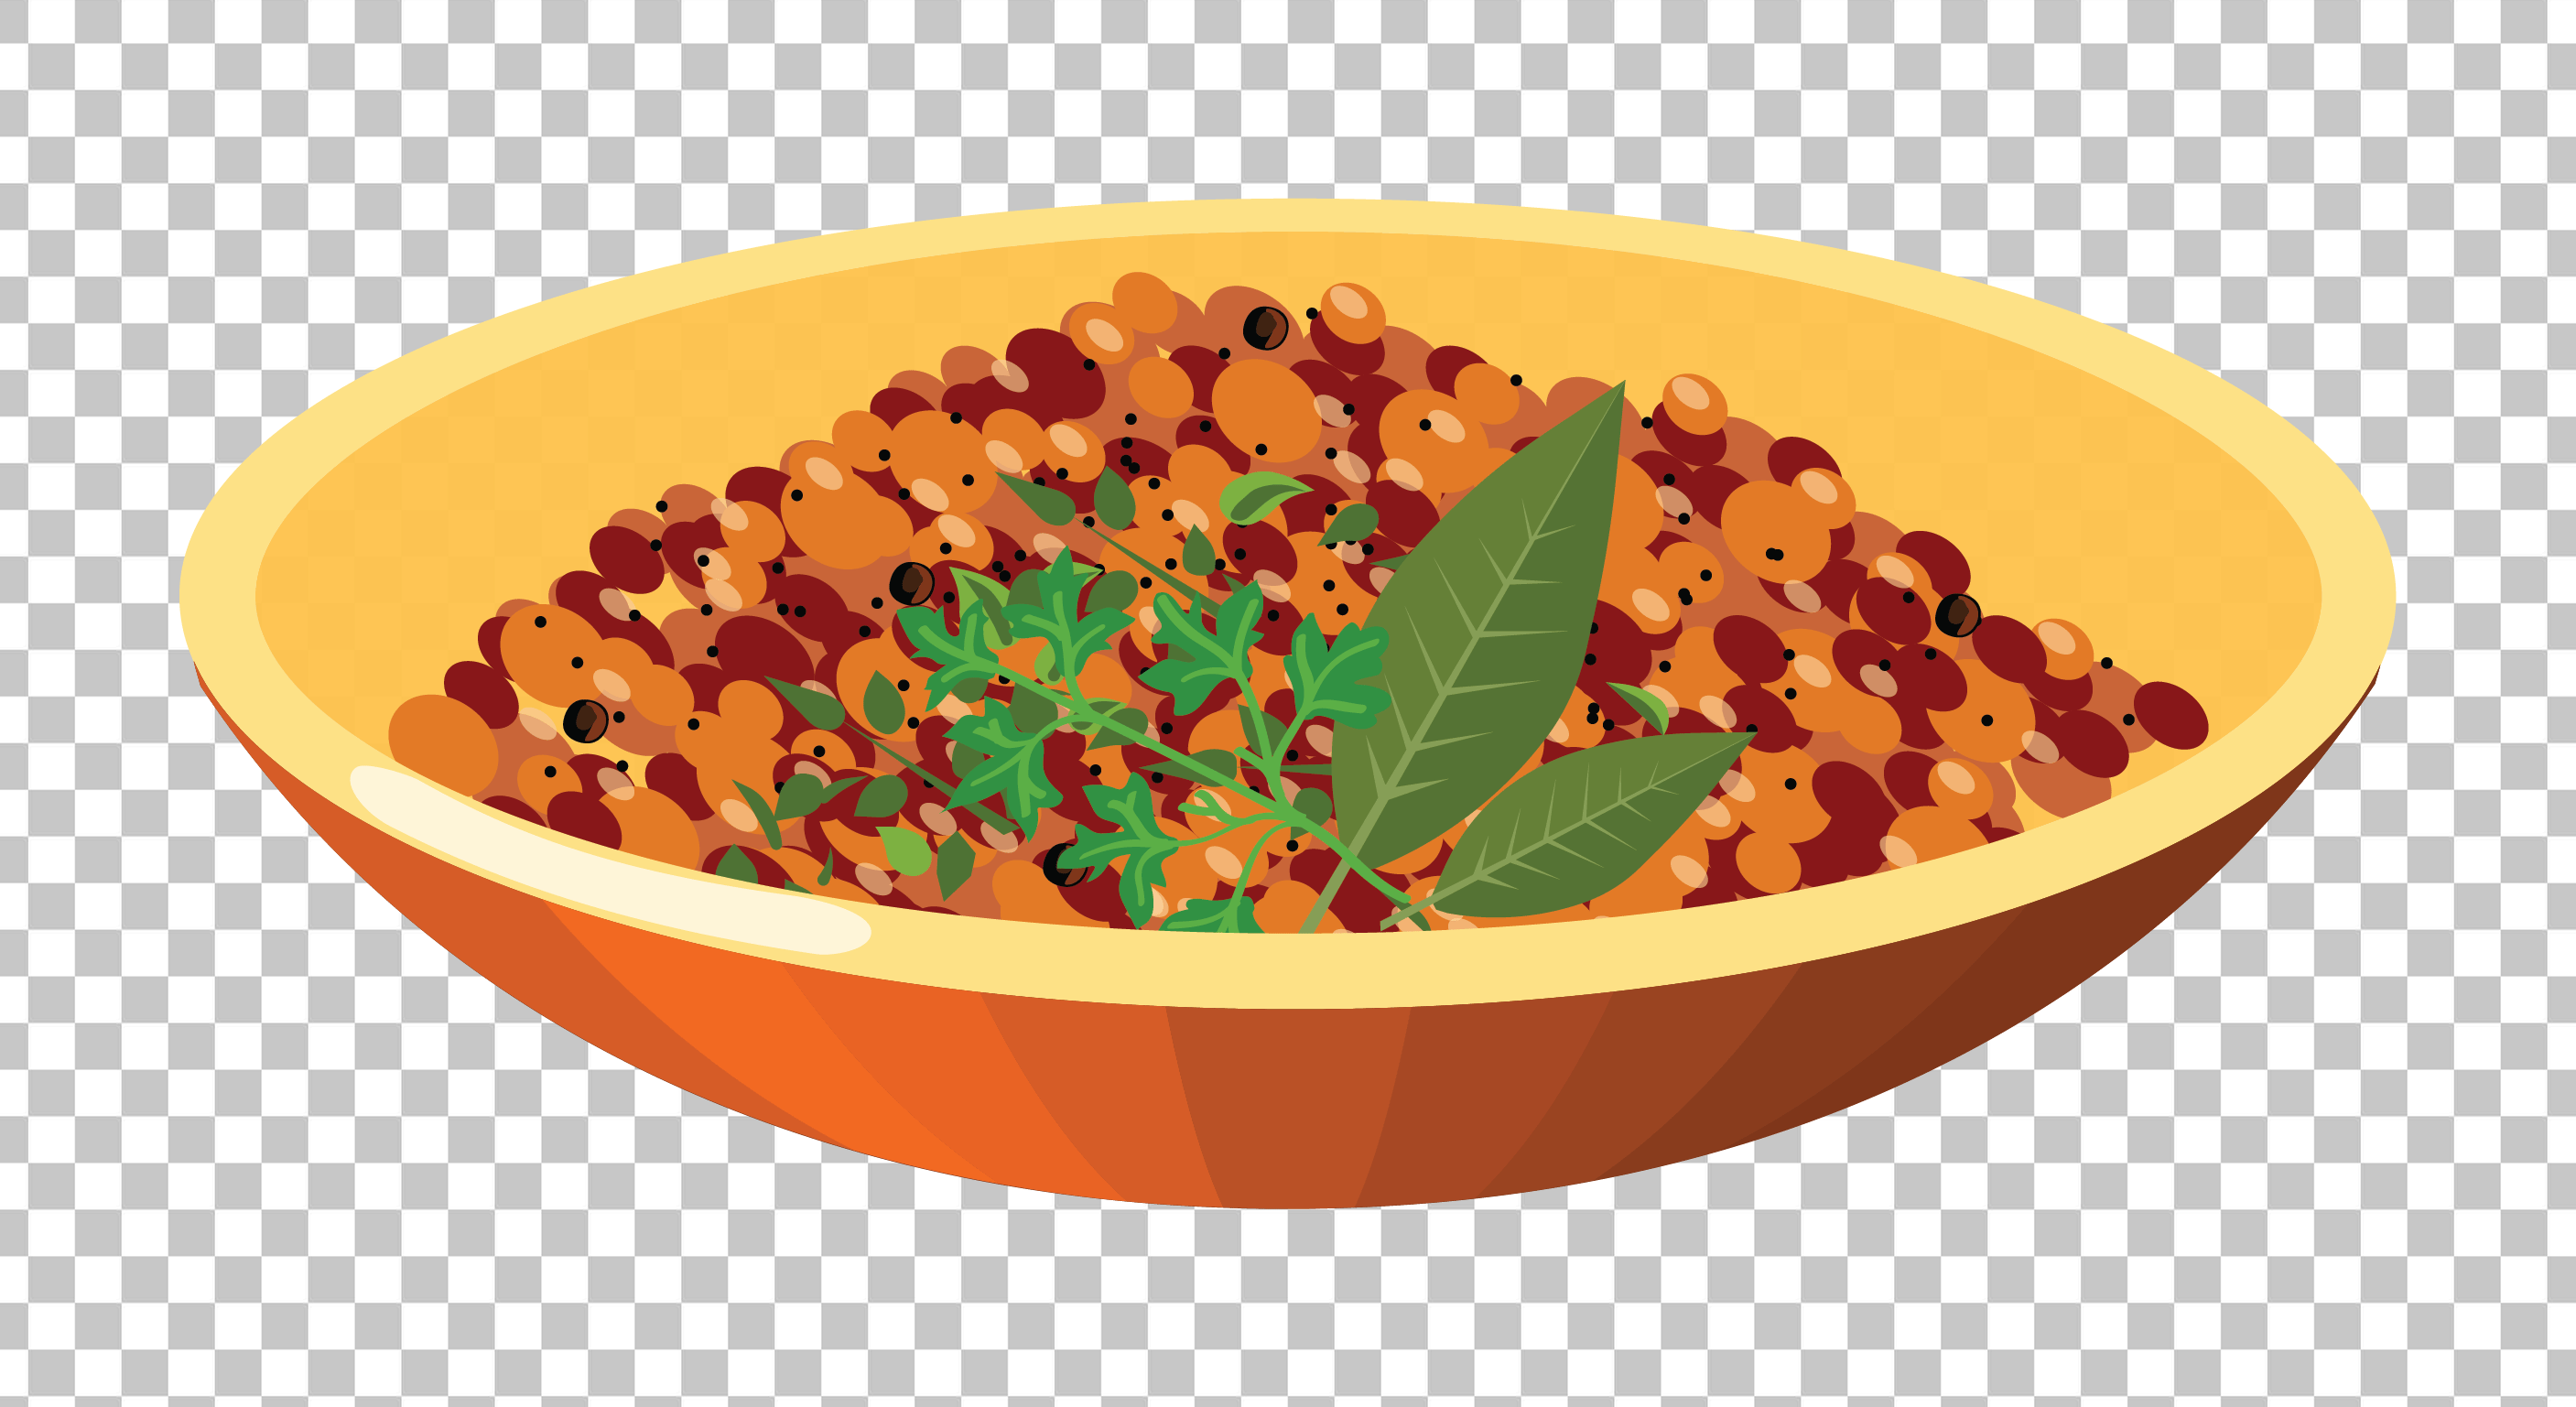 Bowl of beans Vector PNG Image